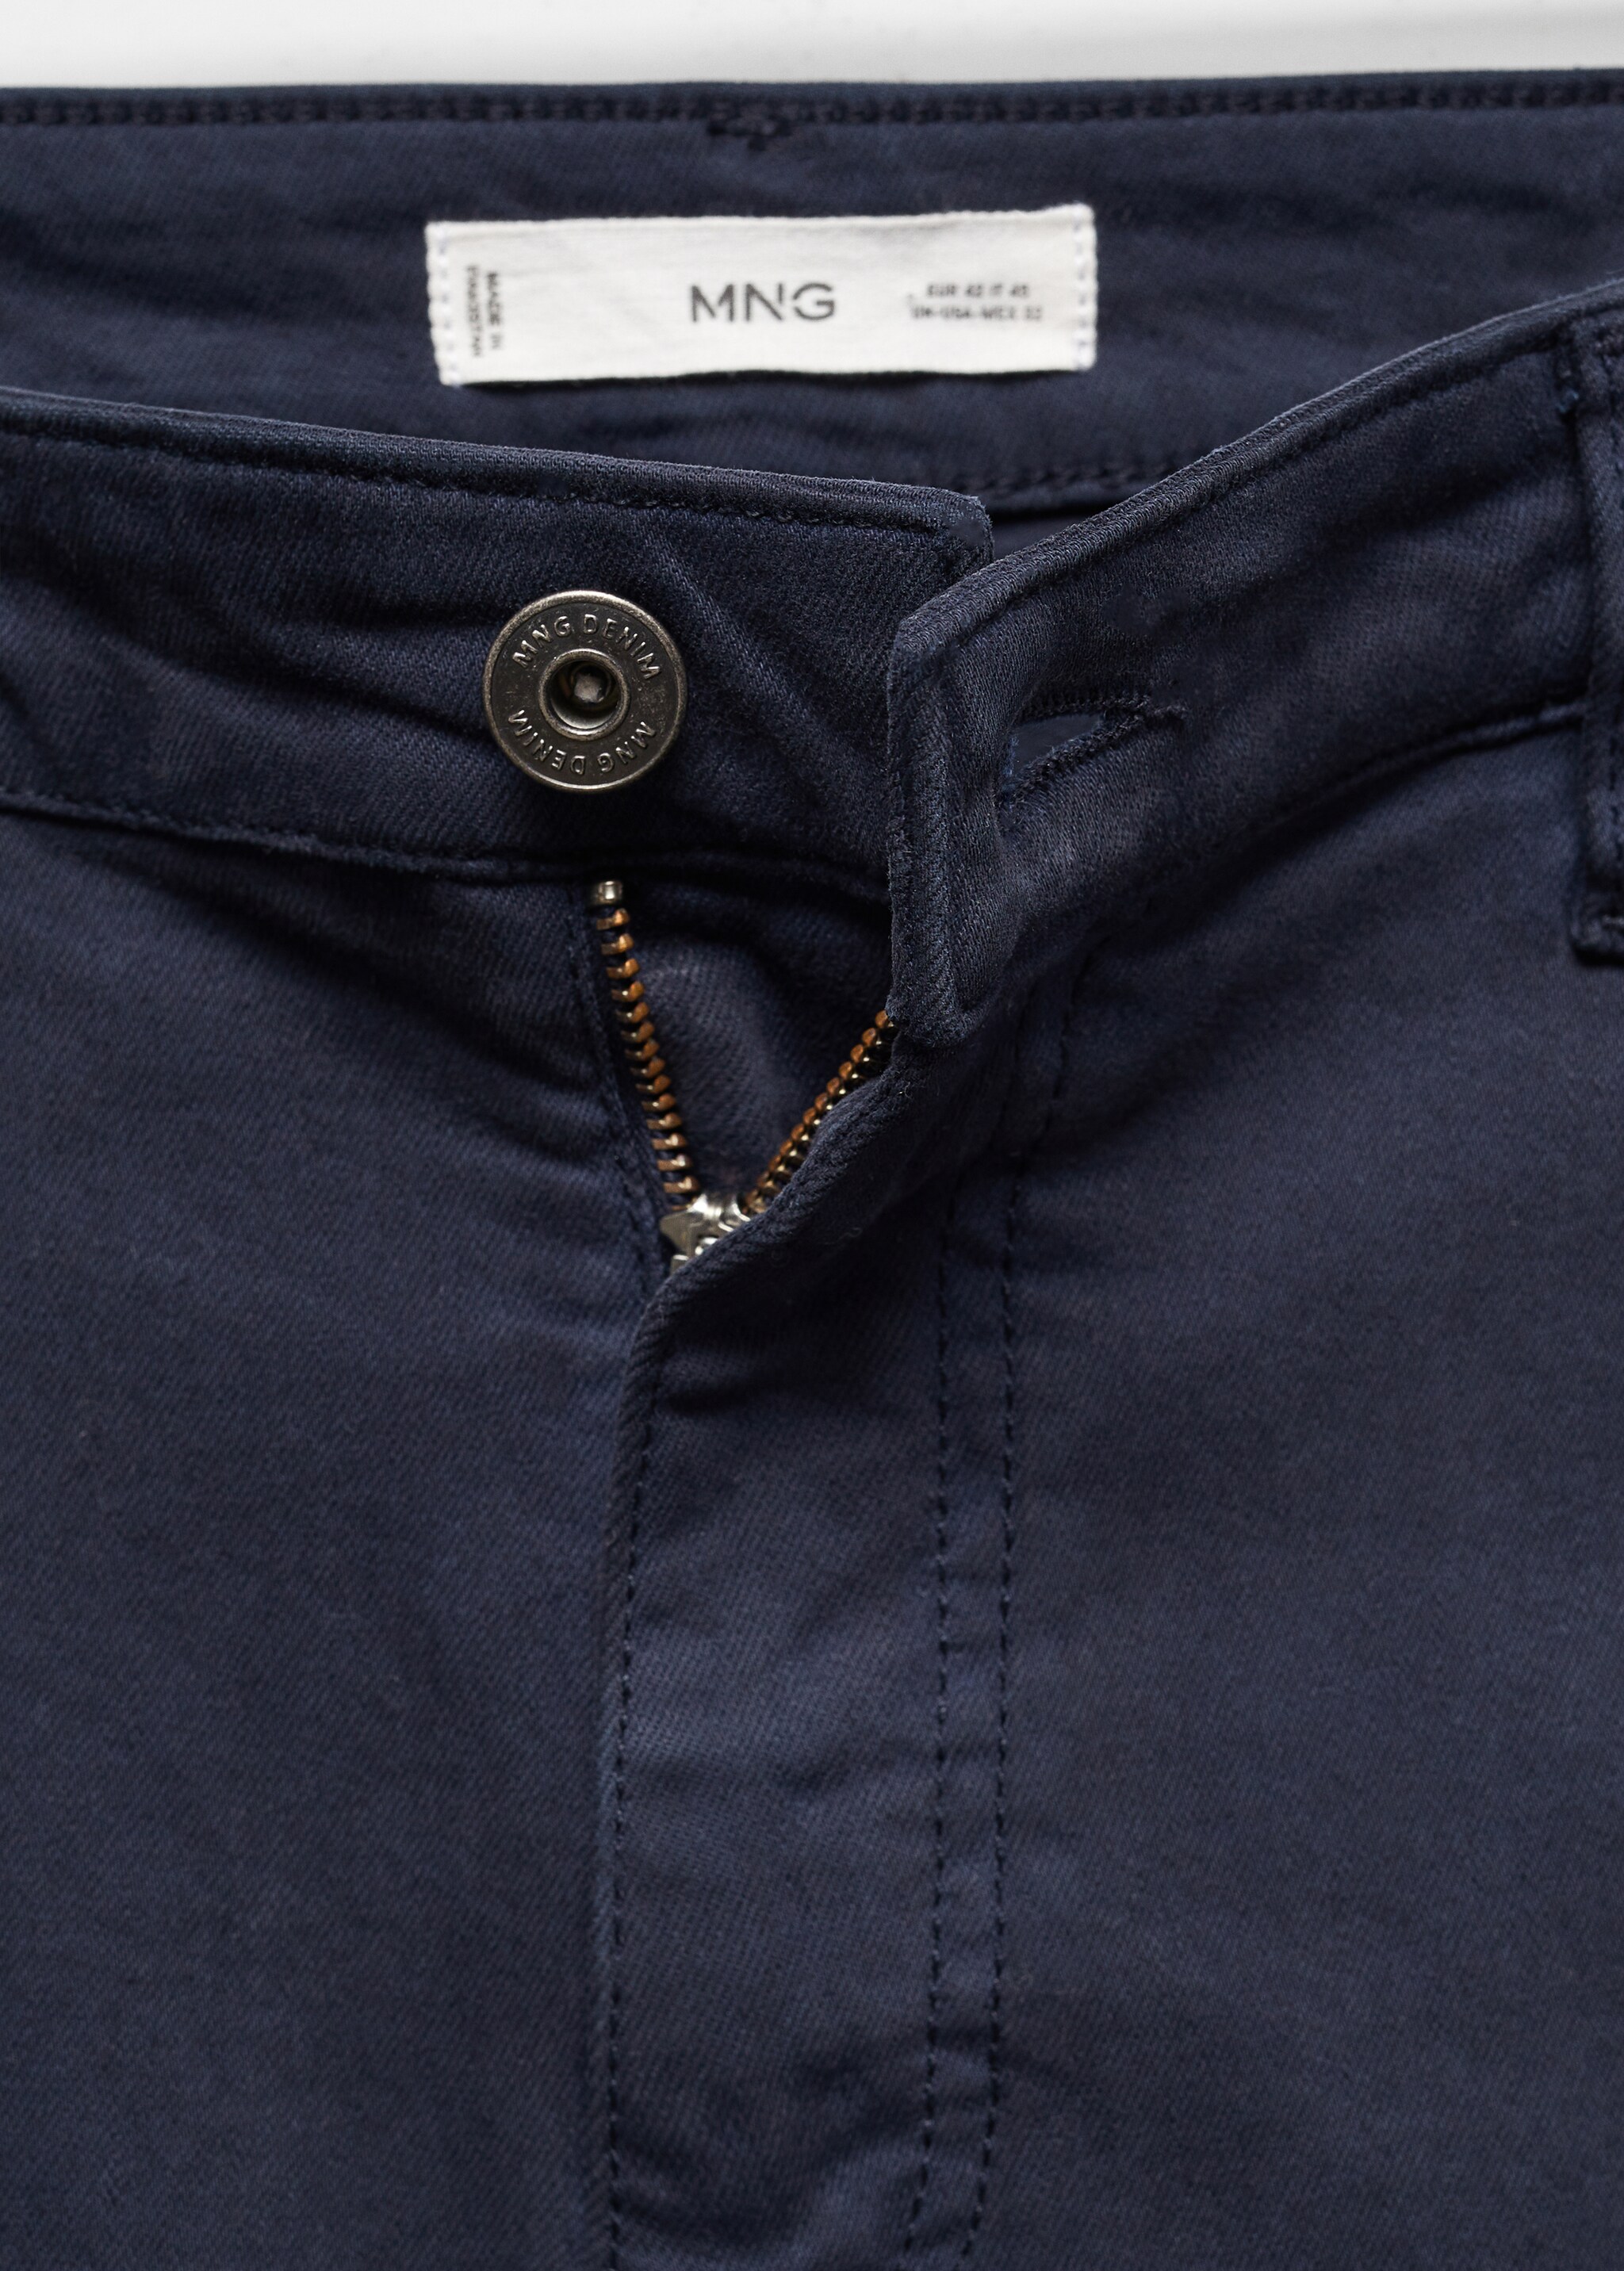 Billy skinny jeans - Details of the article 8